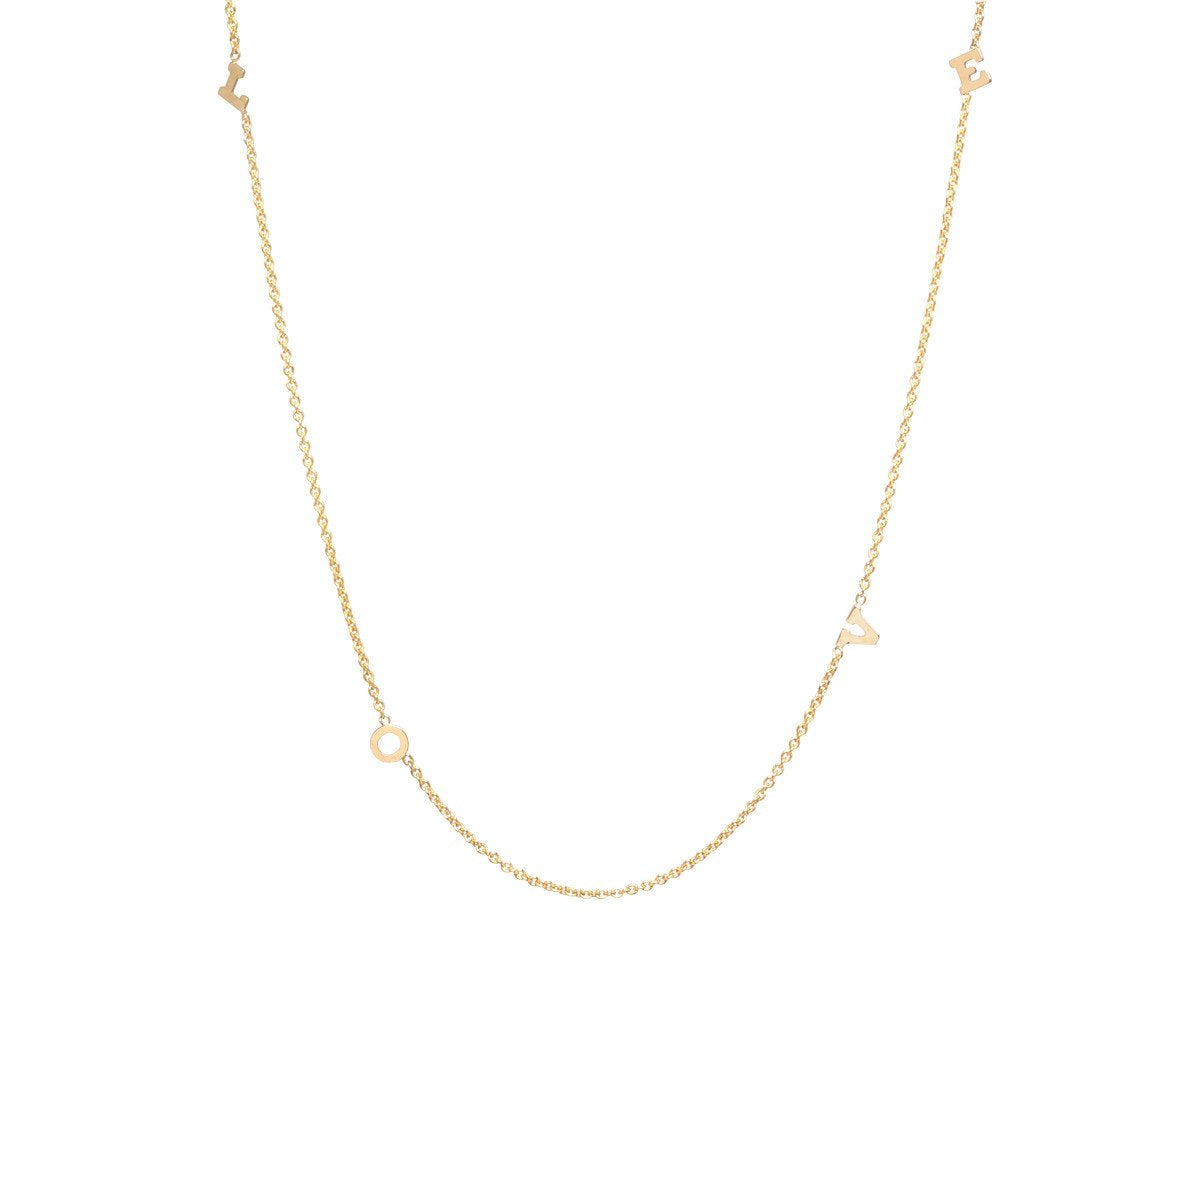 Tiny Gold Four Letter LOVE Necklace | Art + Soul Gallery